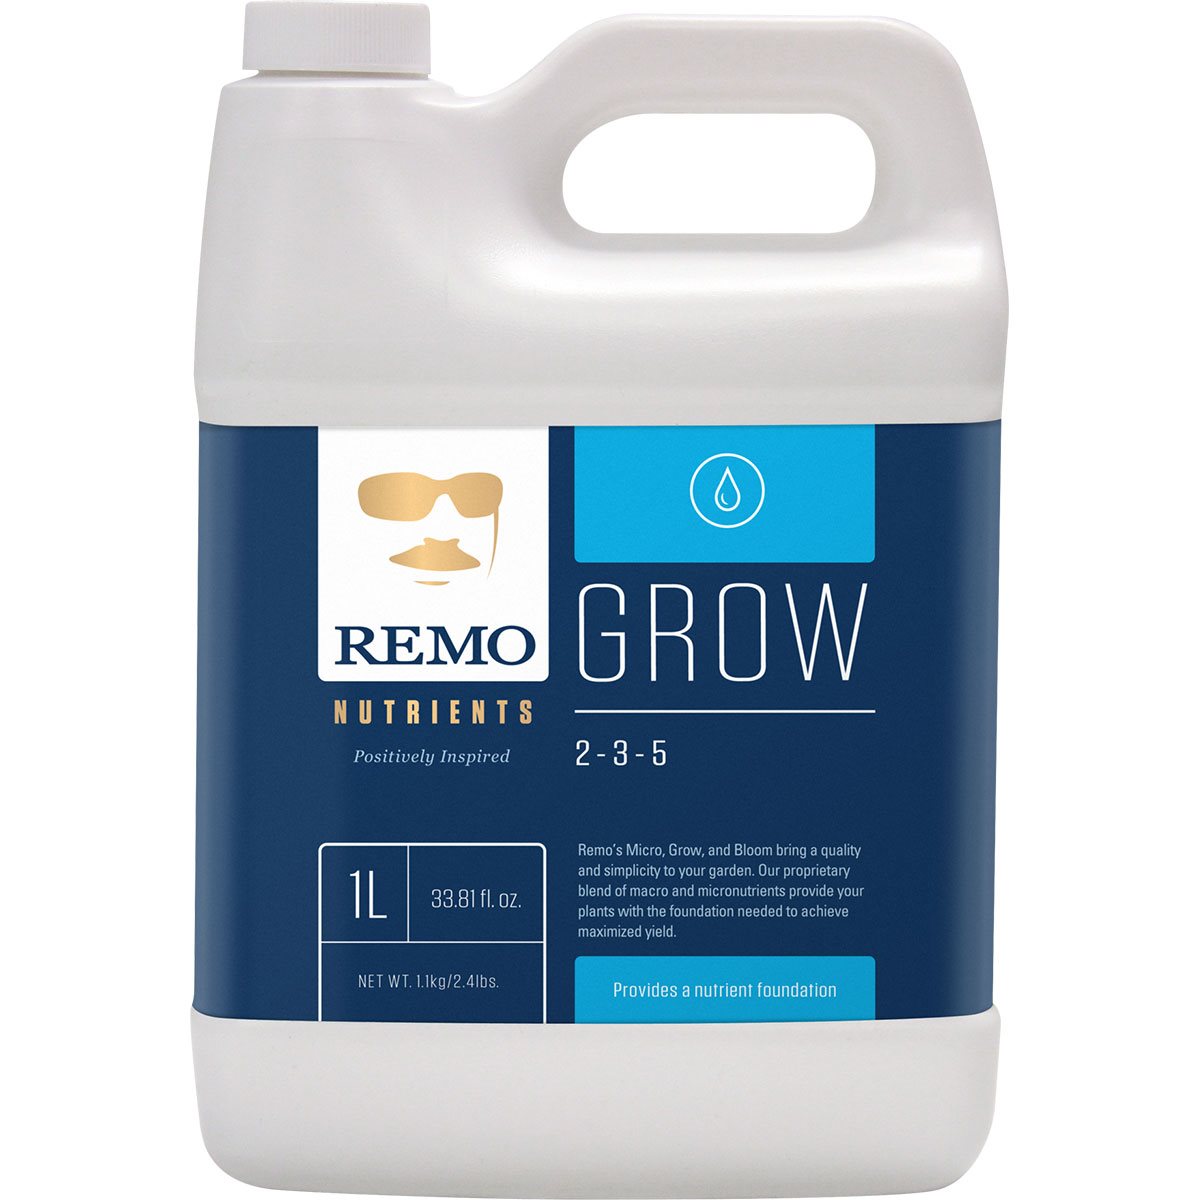 Product Image:Remo Nutrients Grow (2-3-5)